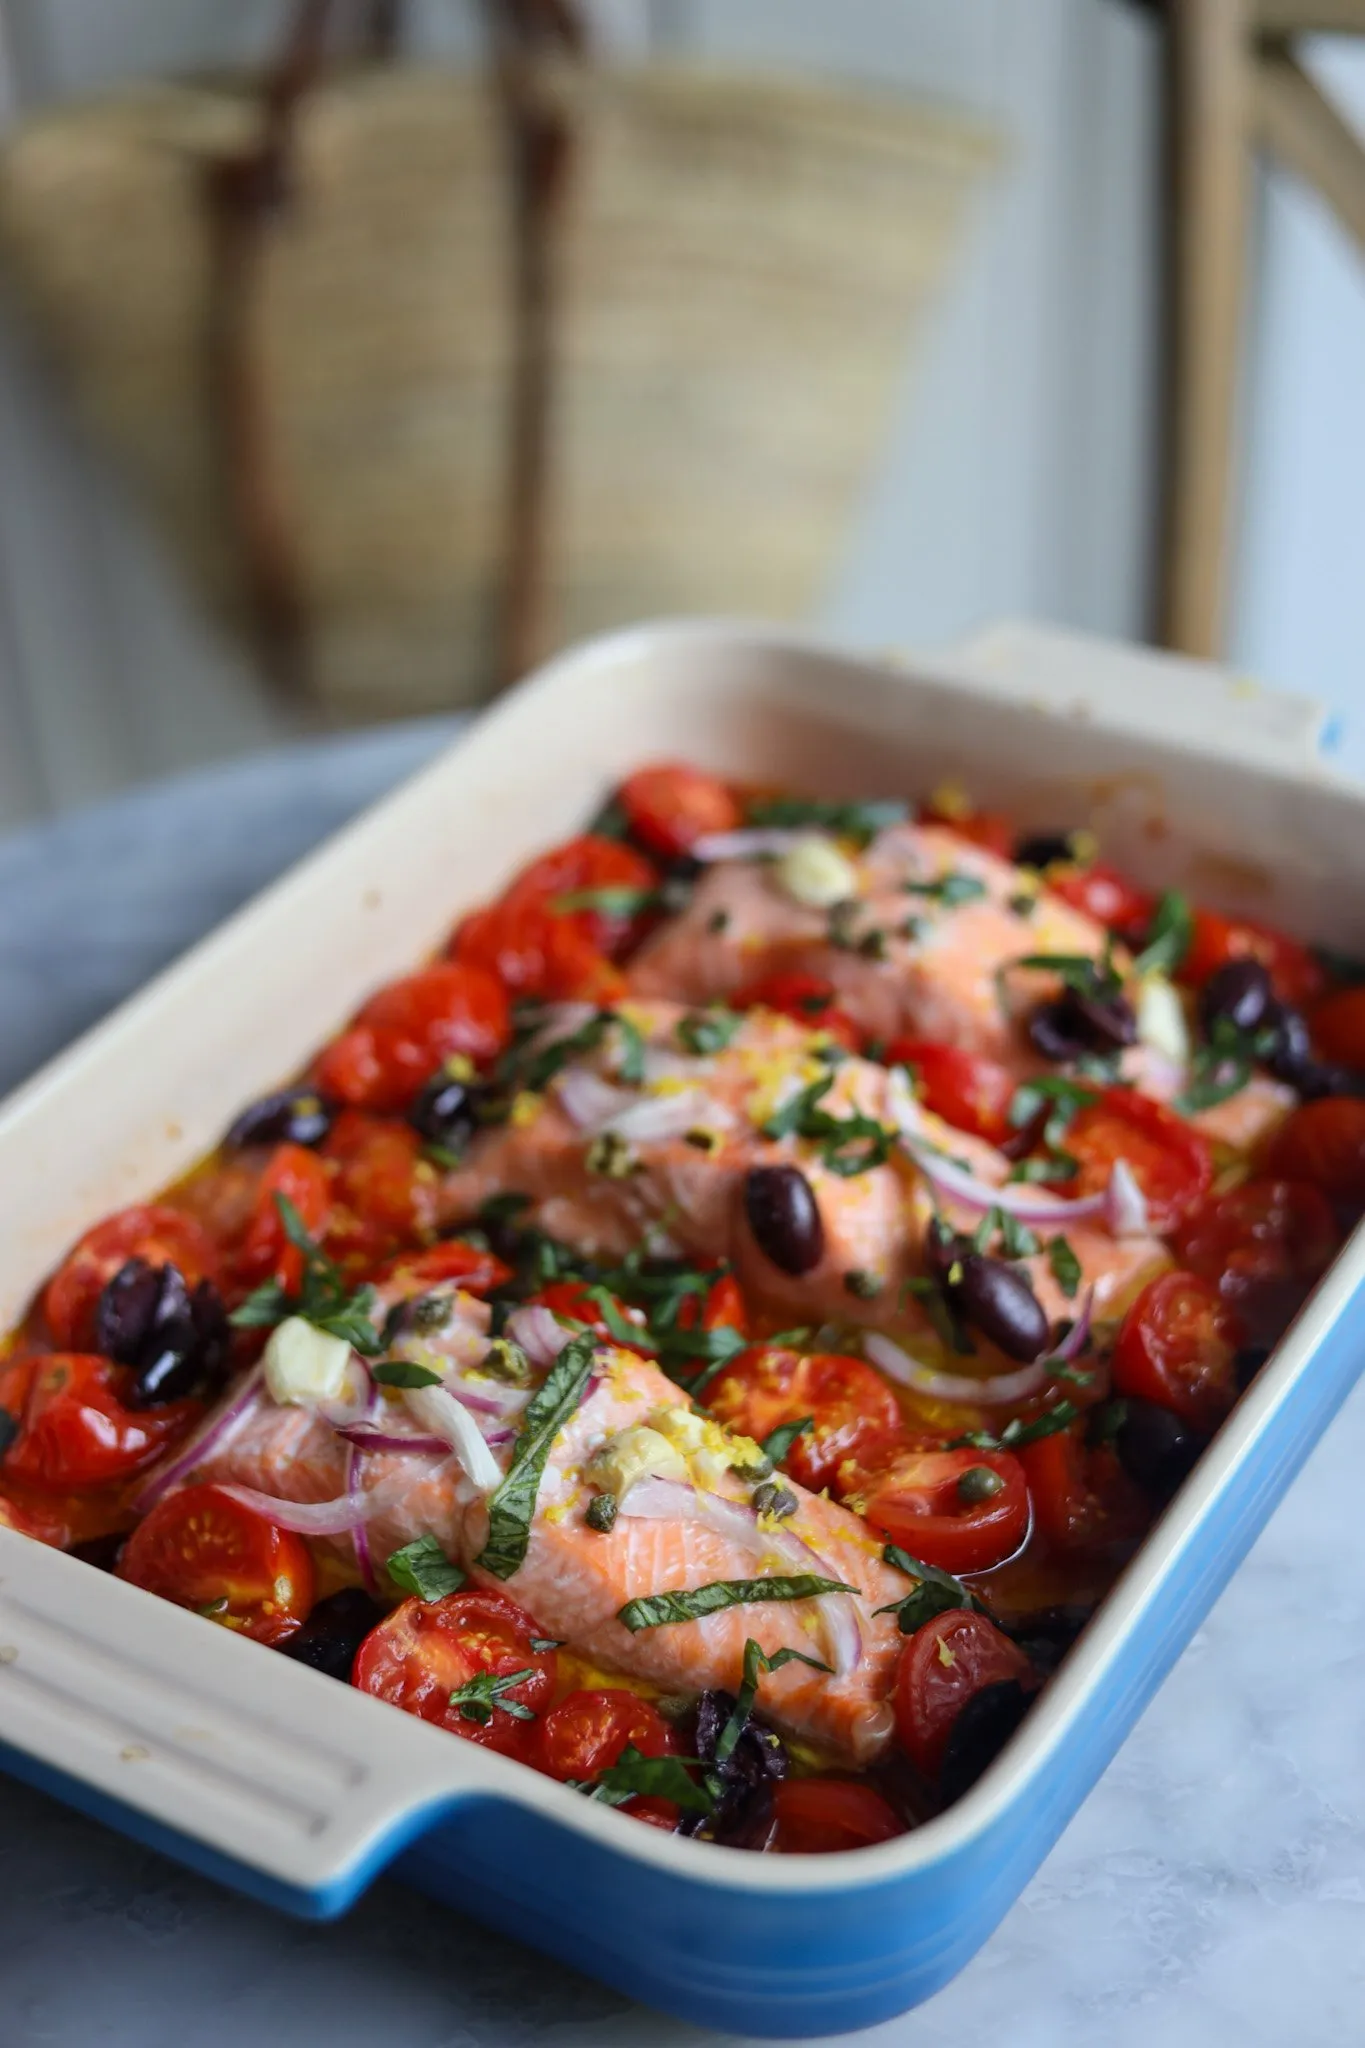 Mediterranean Salmon baked with tomatoes, garlic, basil, olives and capers